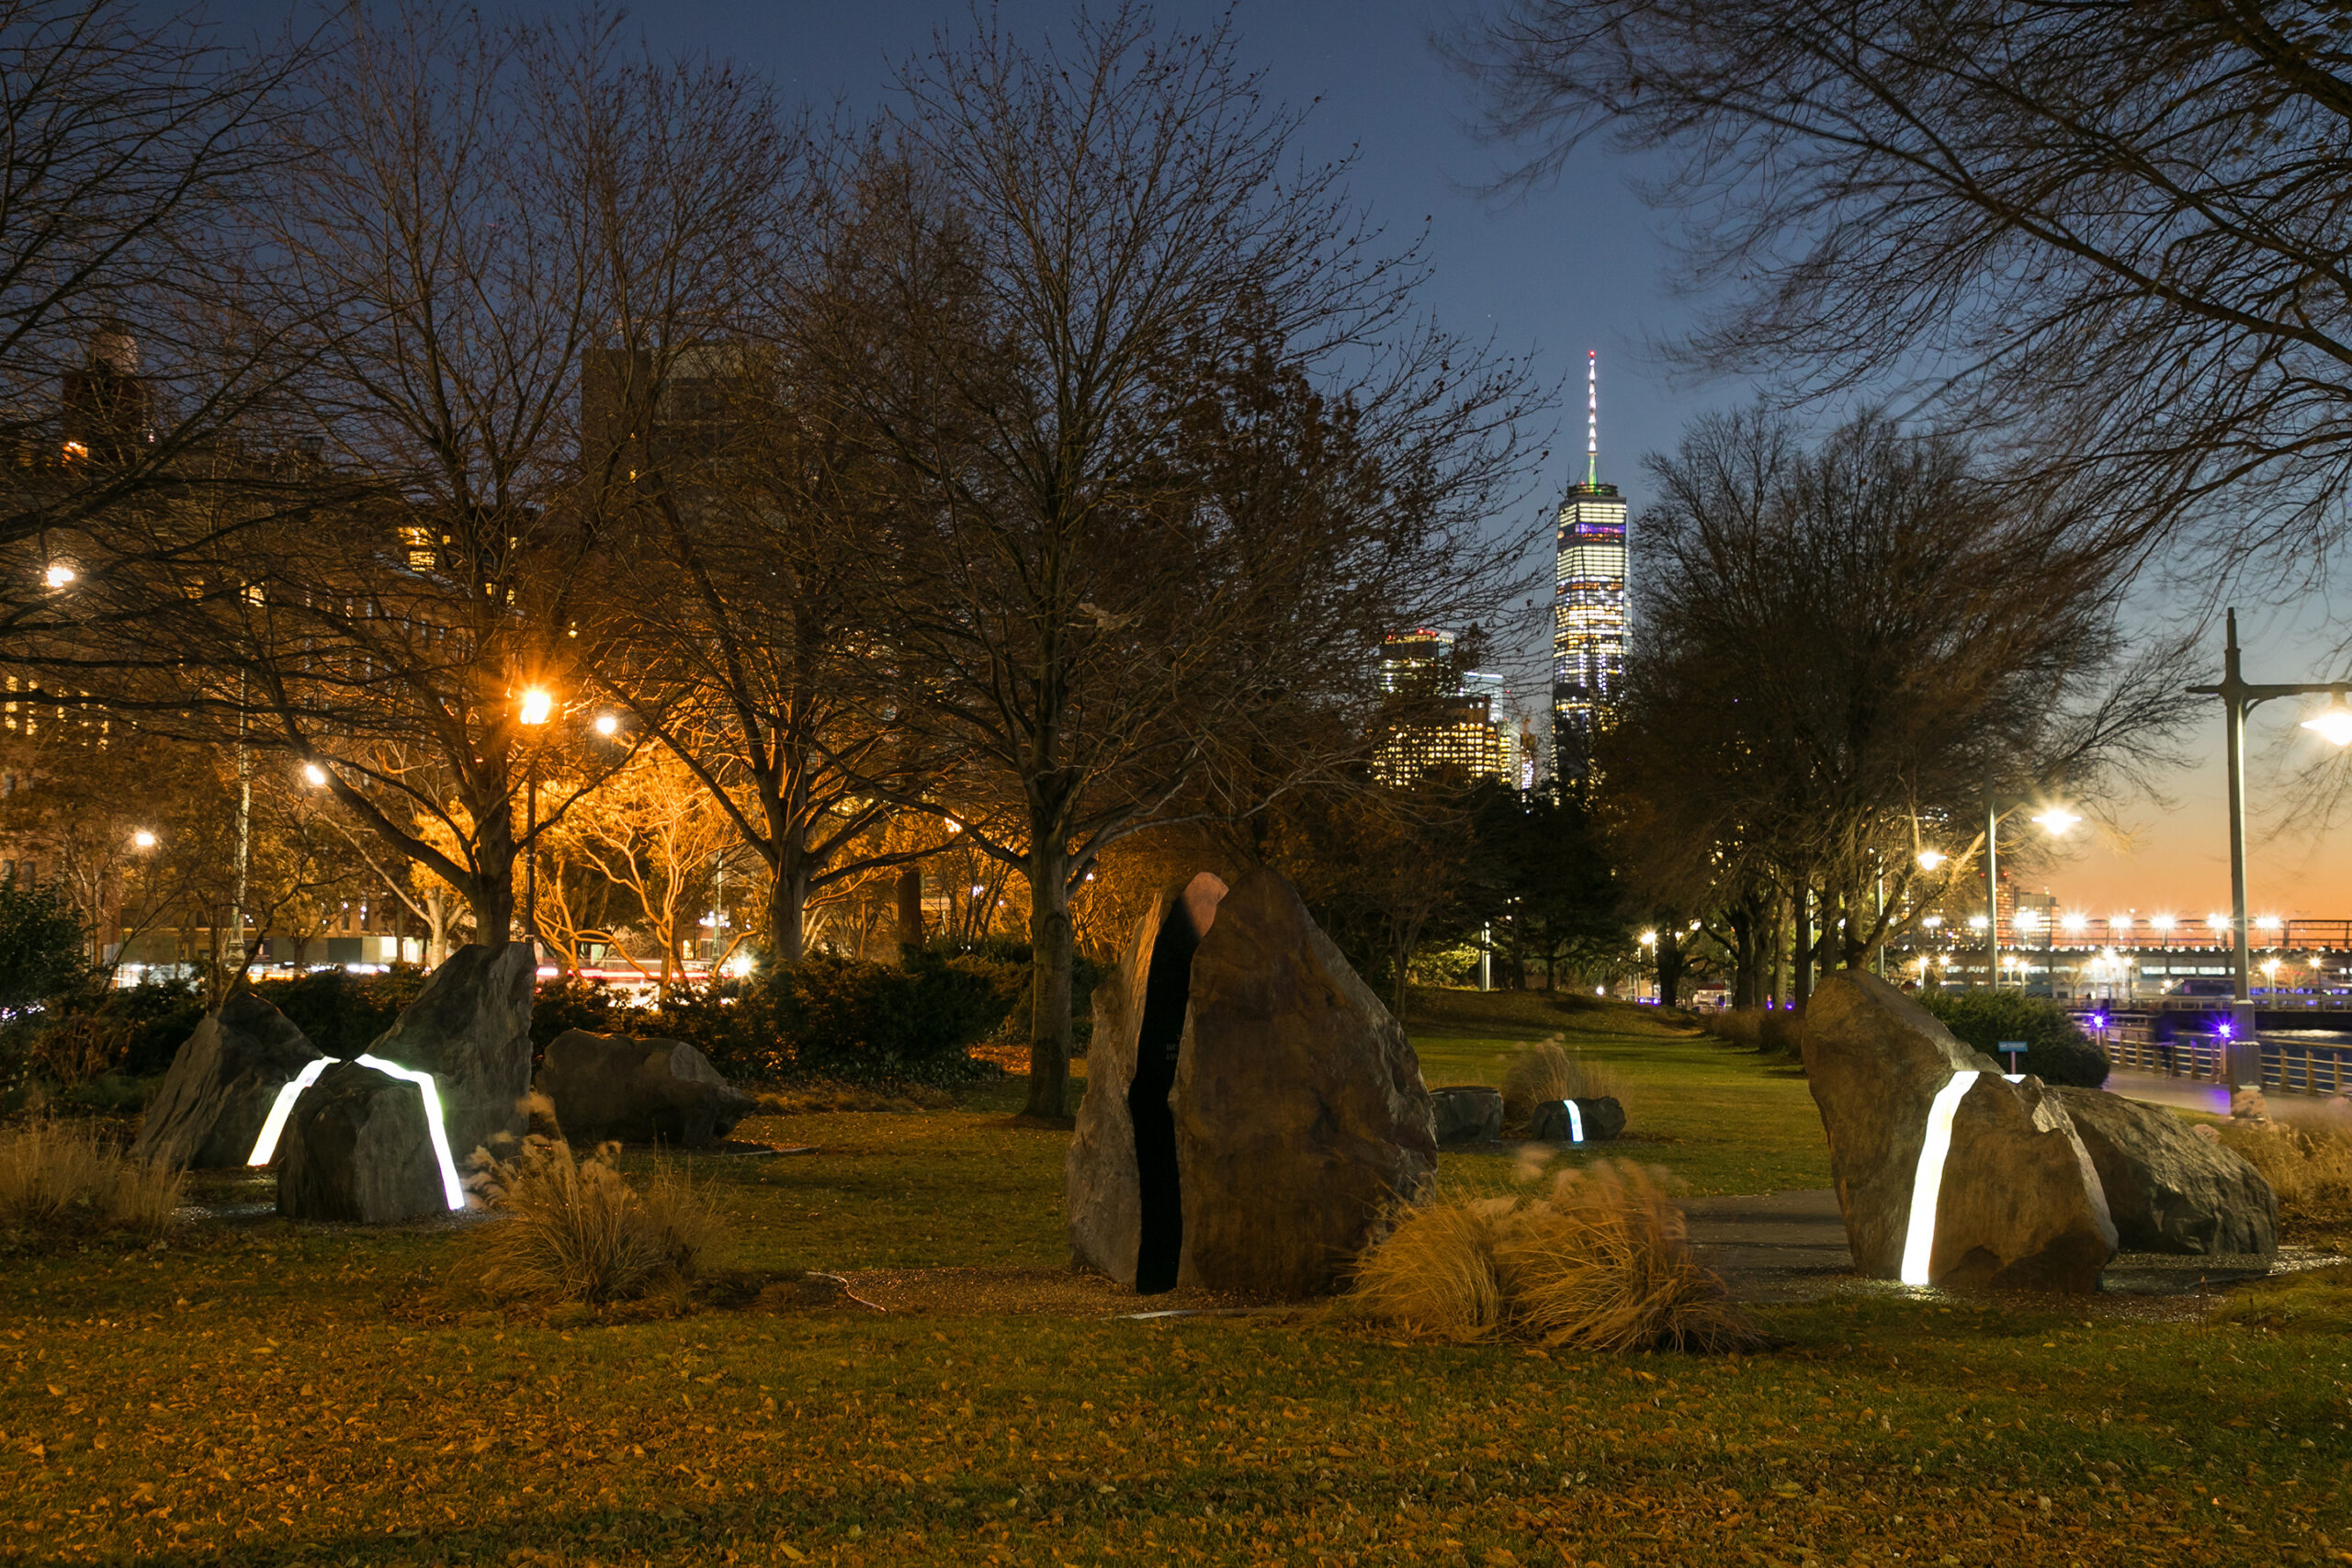 The LGBT Monument by Anthony Goicolea - multiple boulders with prismatic aesthetics that shimmer